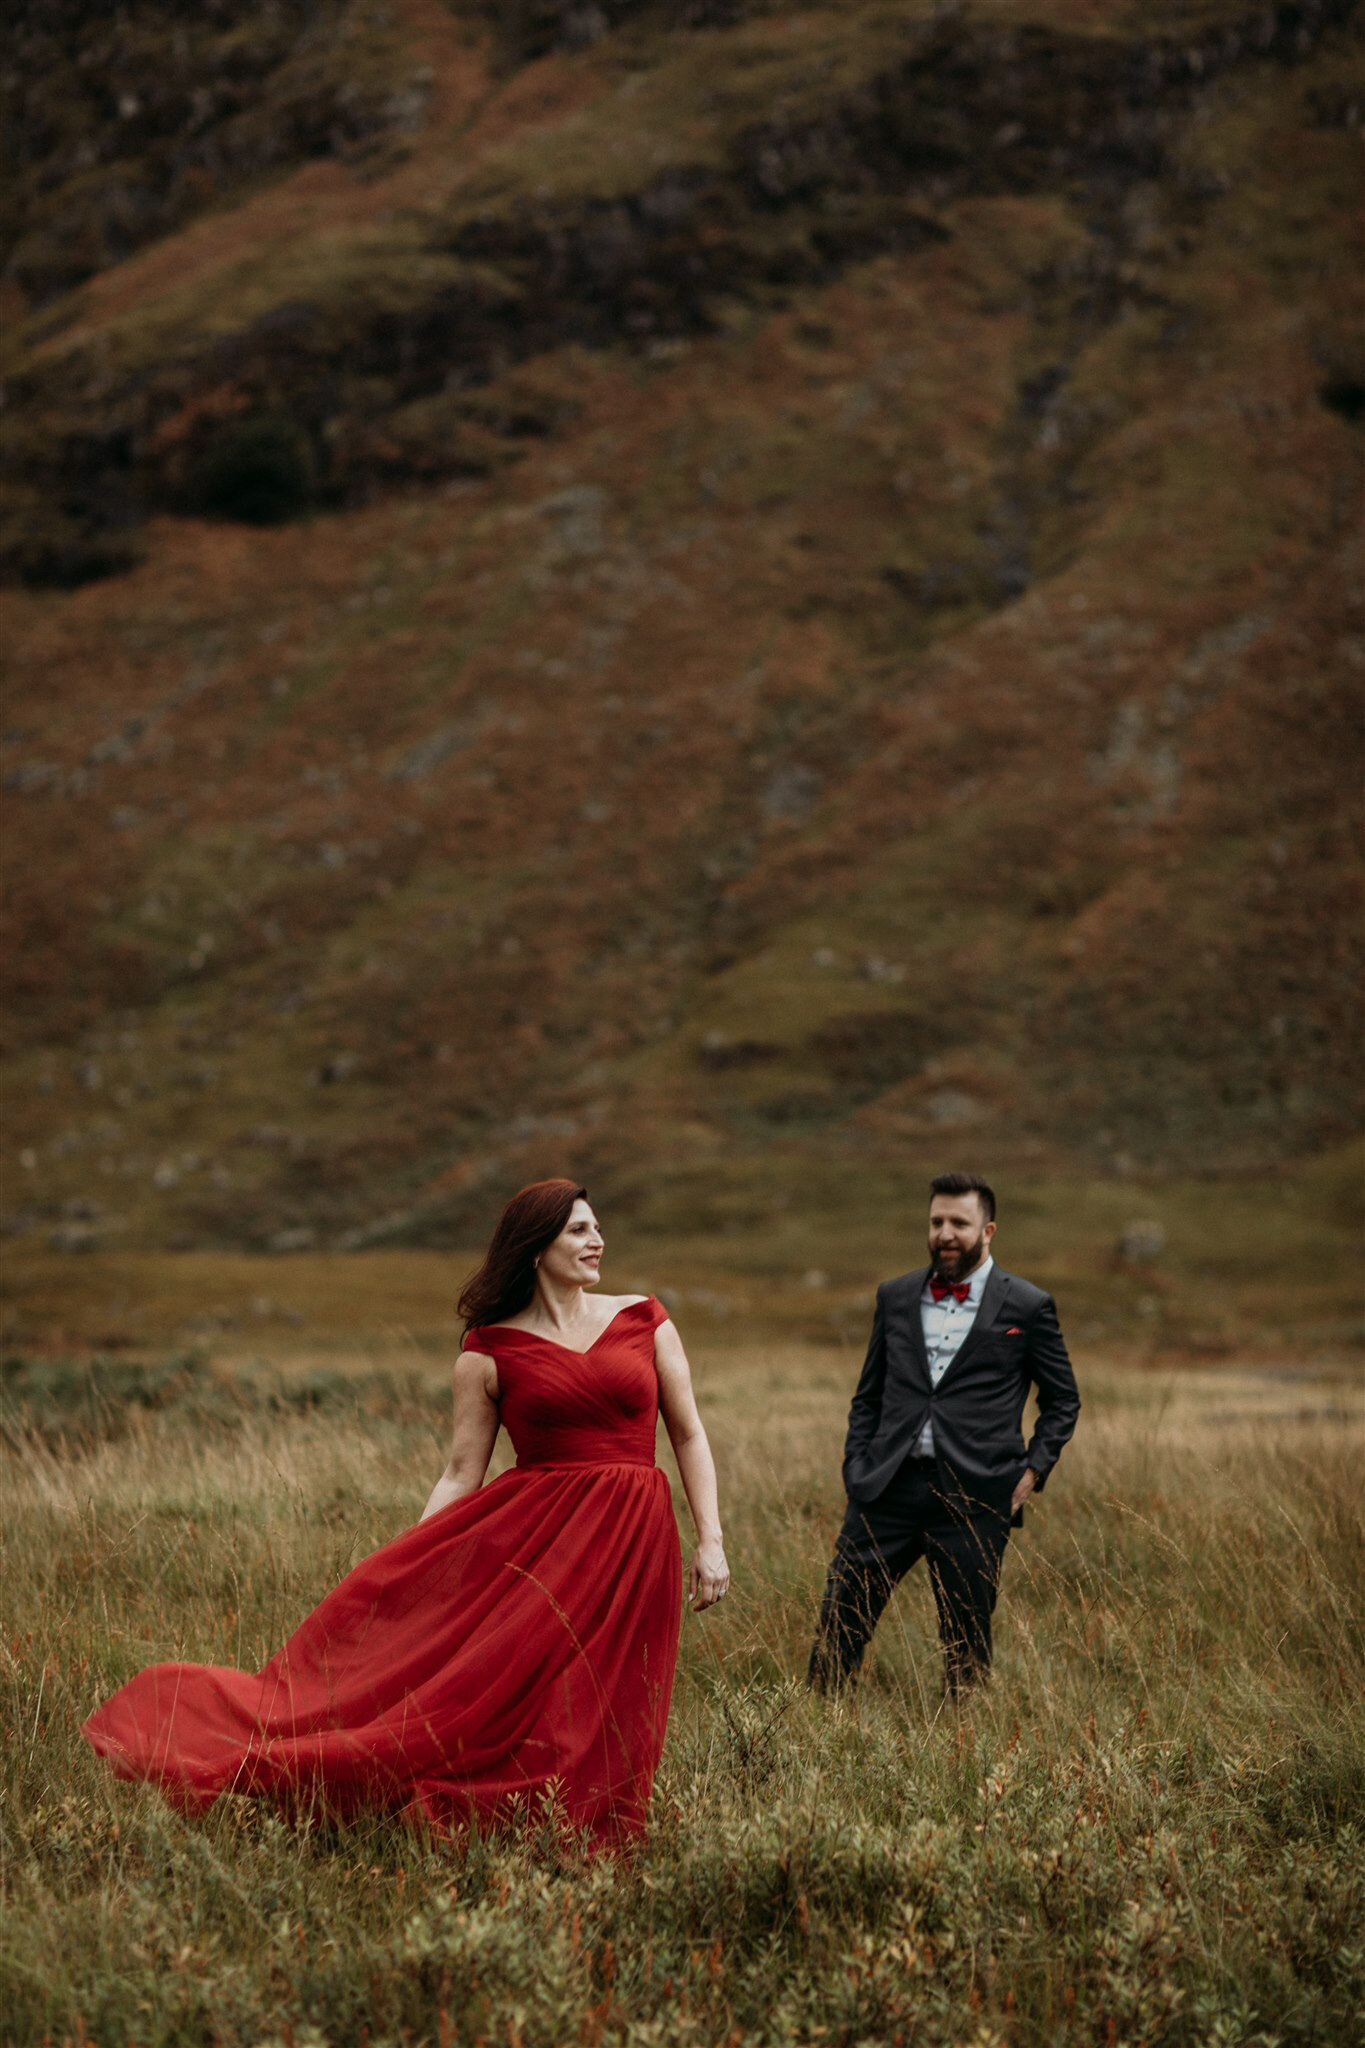 Glen Coe Scotland elopement adventure session. Bride in red dress blowing in the wind and her groom stand slightly apart in a field in the Scottish Highlands | Adventure elopement photographer